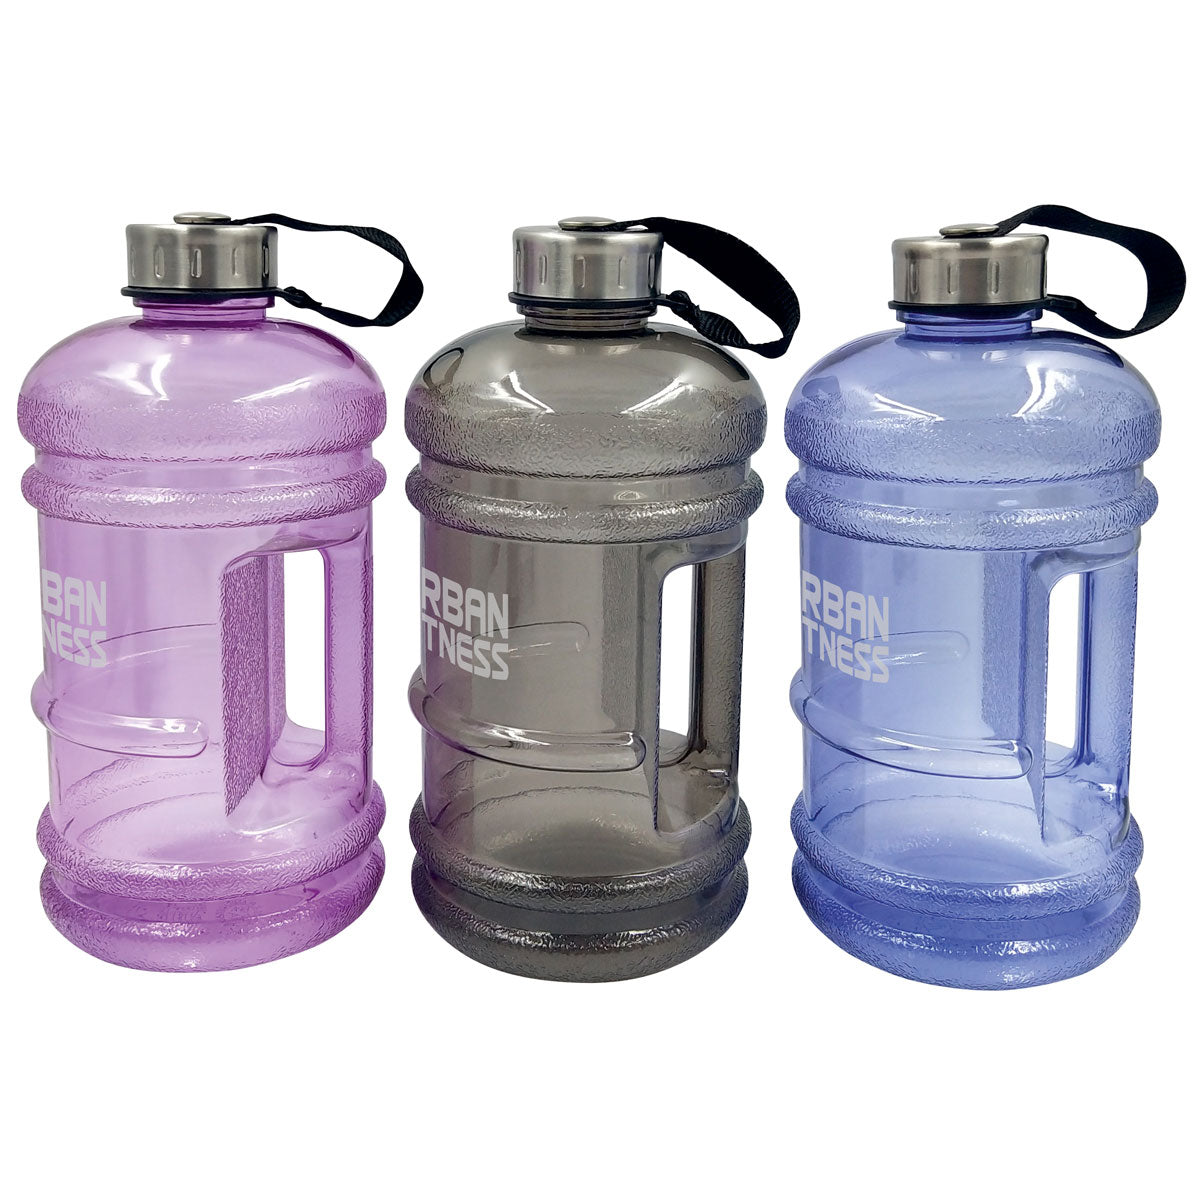 UFE Quench Water Bottle - 2.2 Litre